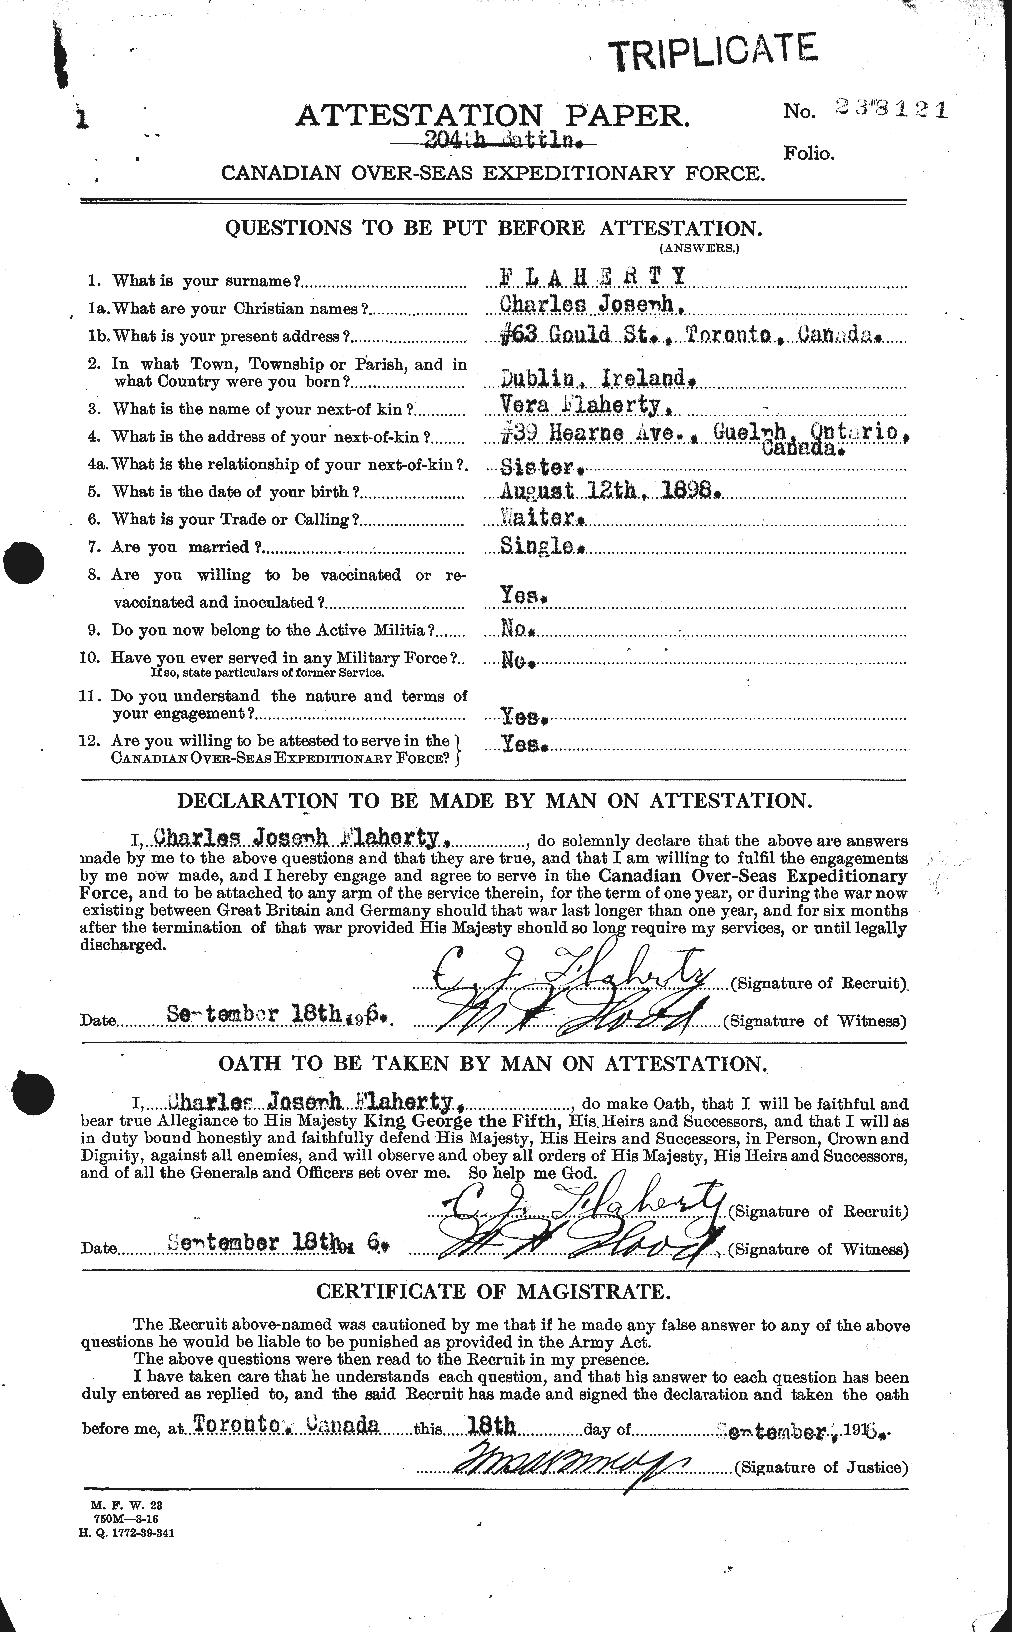 Personnel Records of the First World War - CEF 323347a